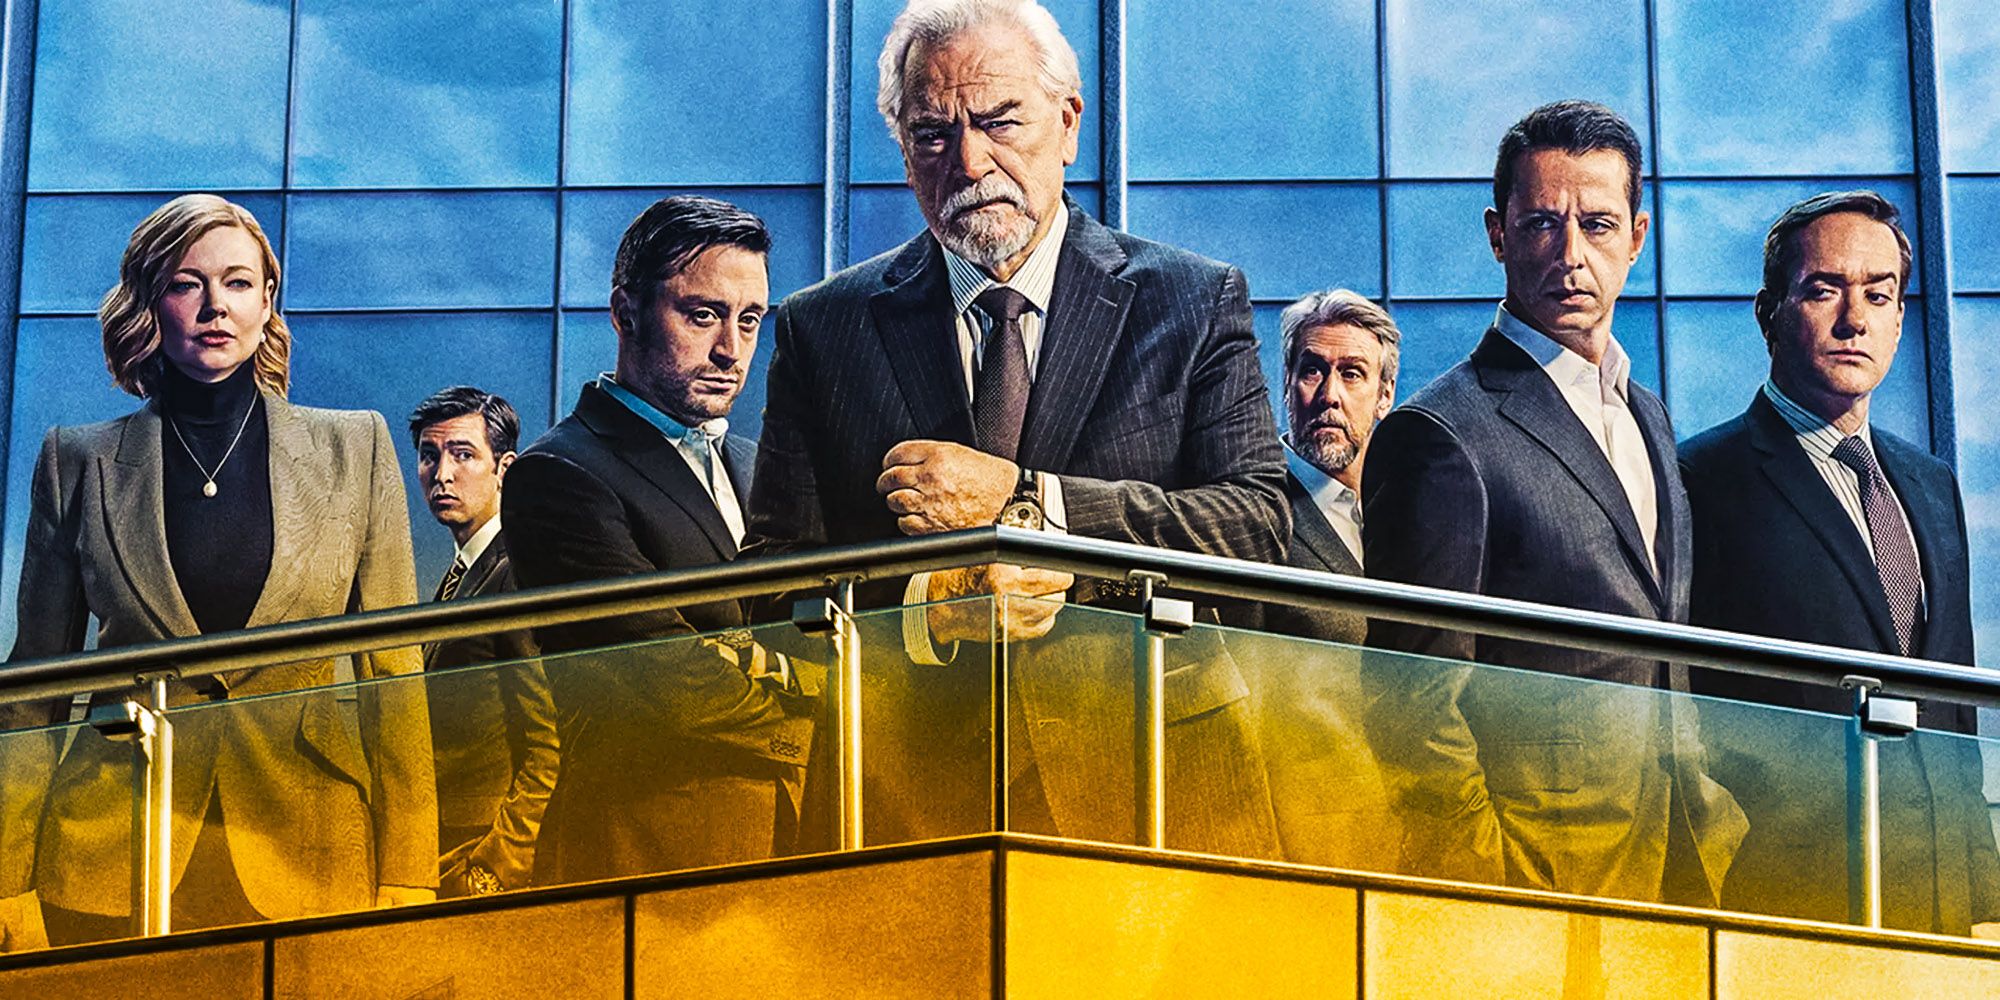 Succession season 4 cast promotional image with all the major characters looking down from a balcony.